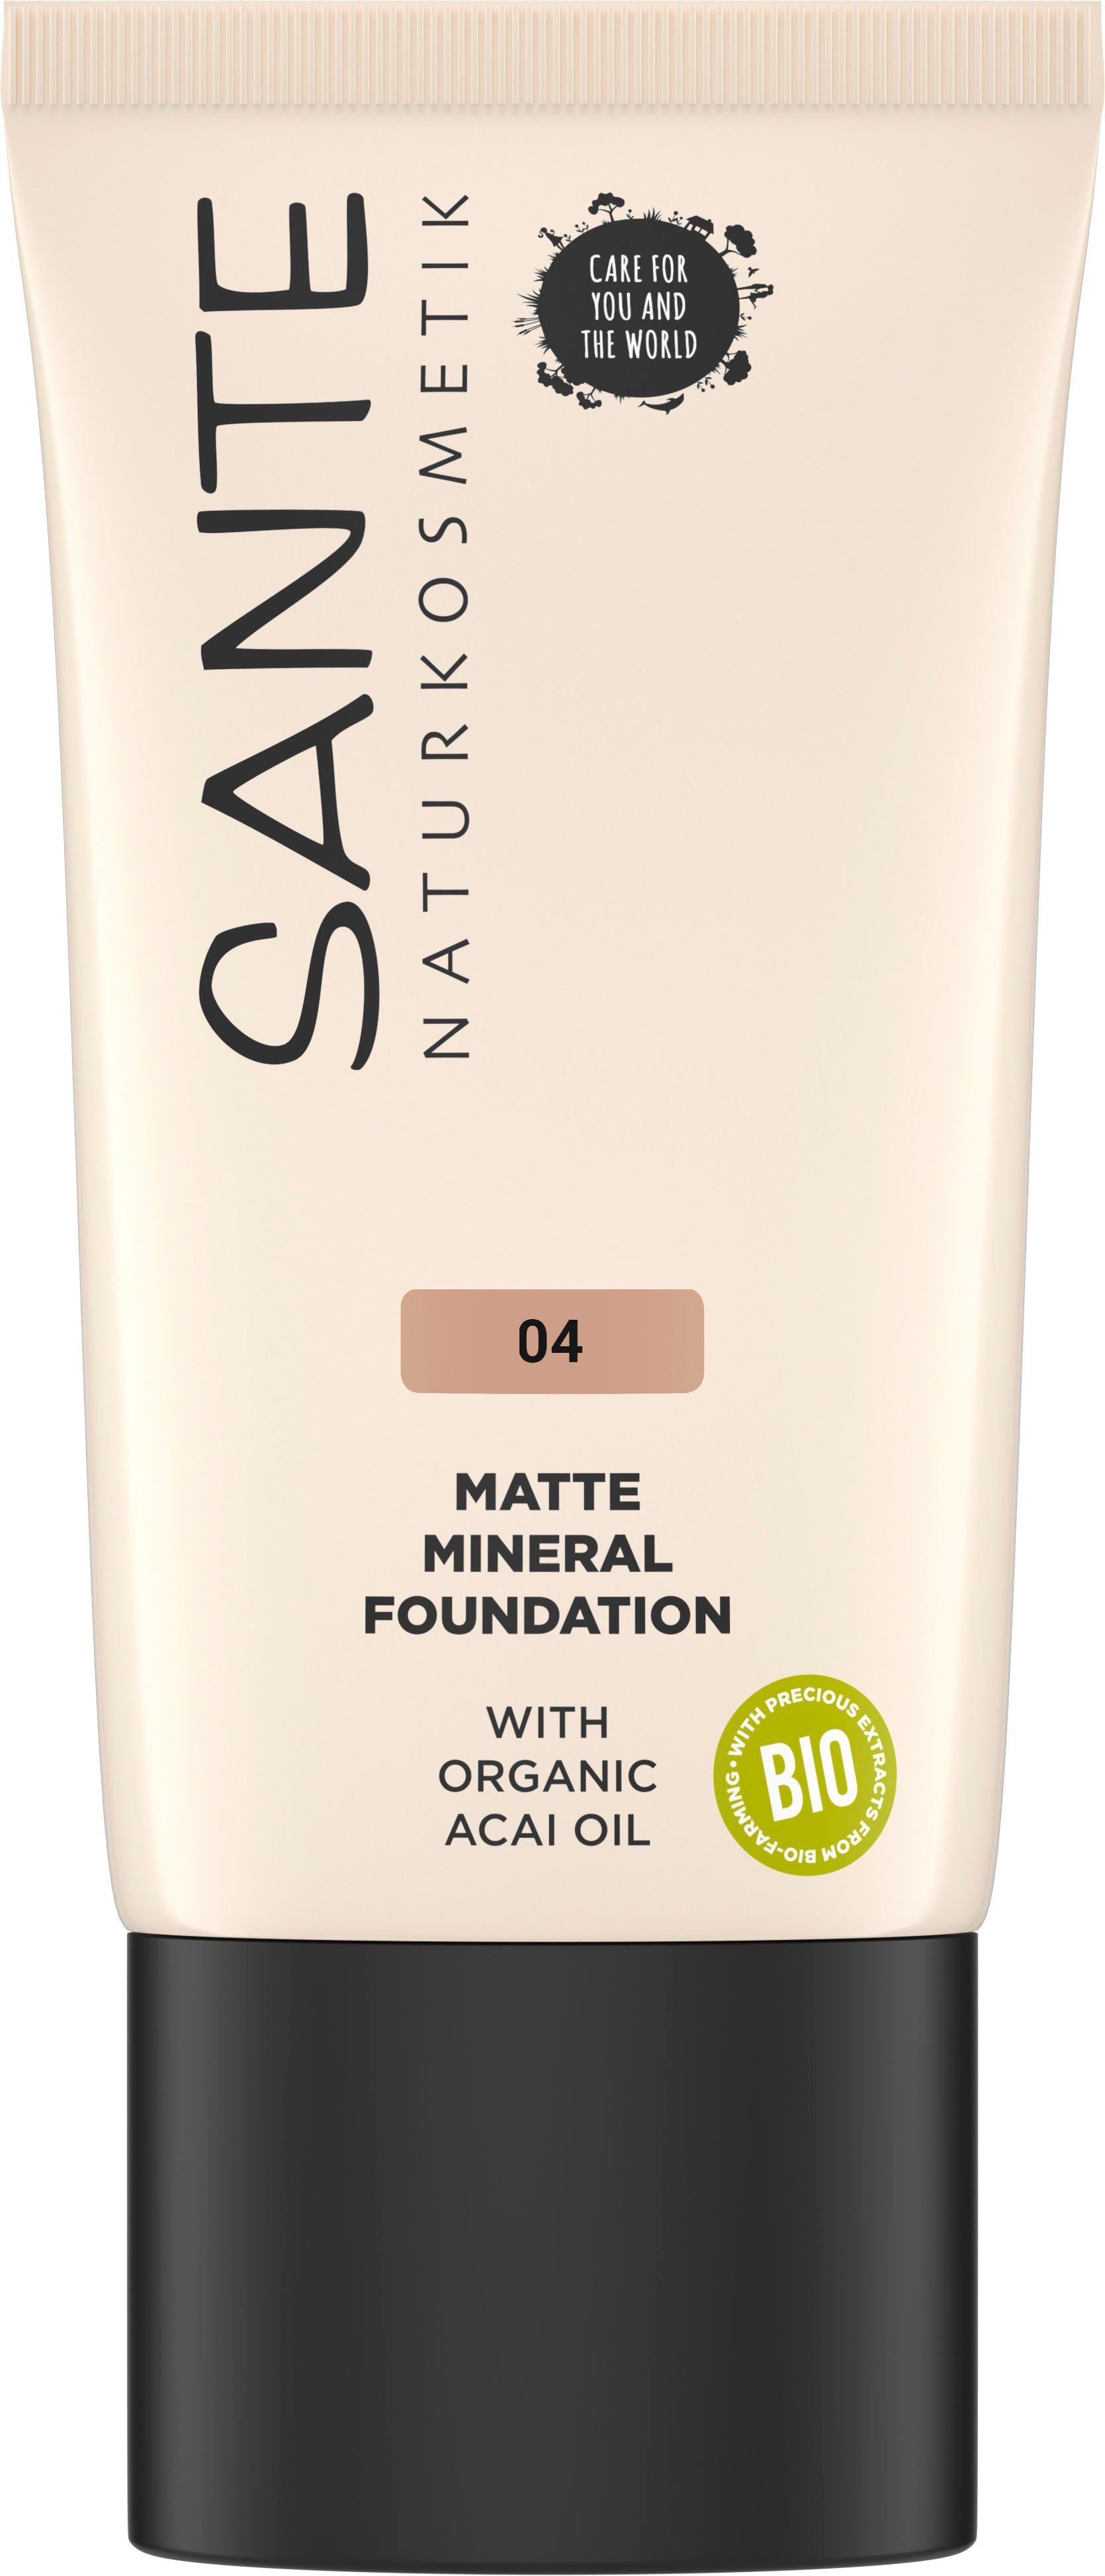 SANTE Foundation Matte Mineral Foundation 04 Fawn Cool